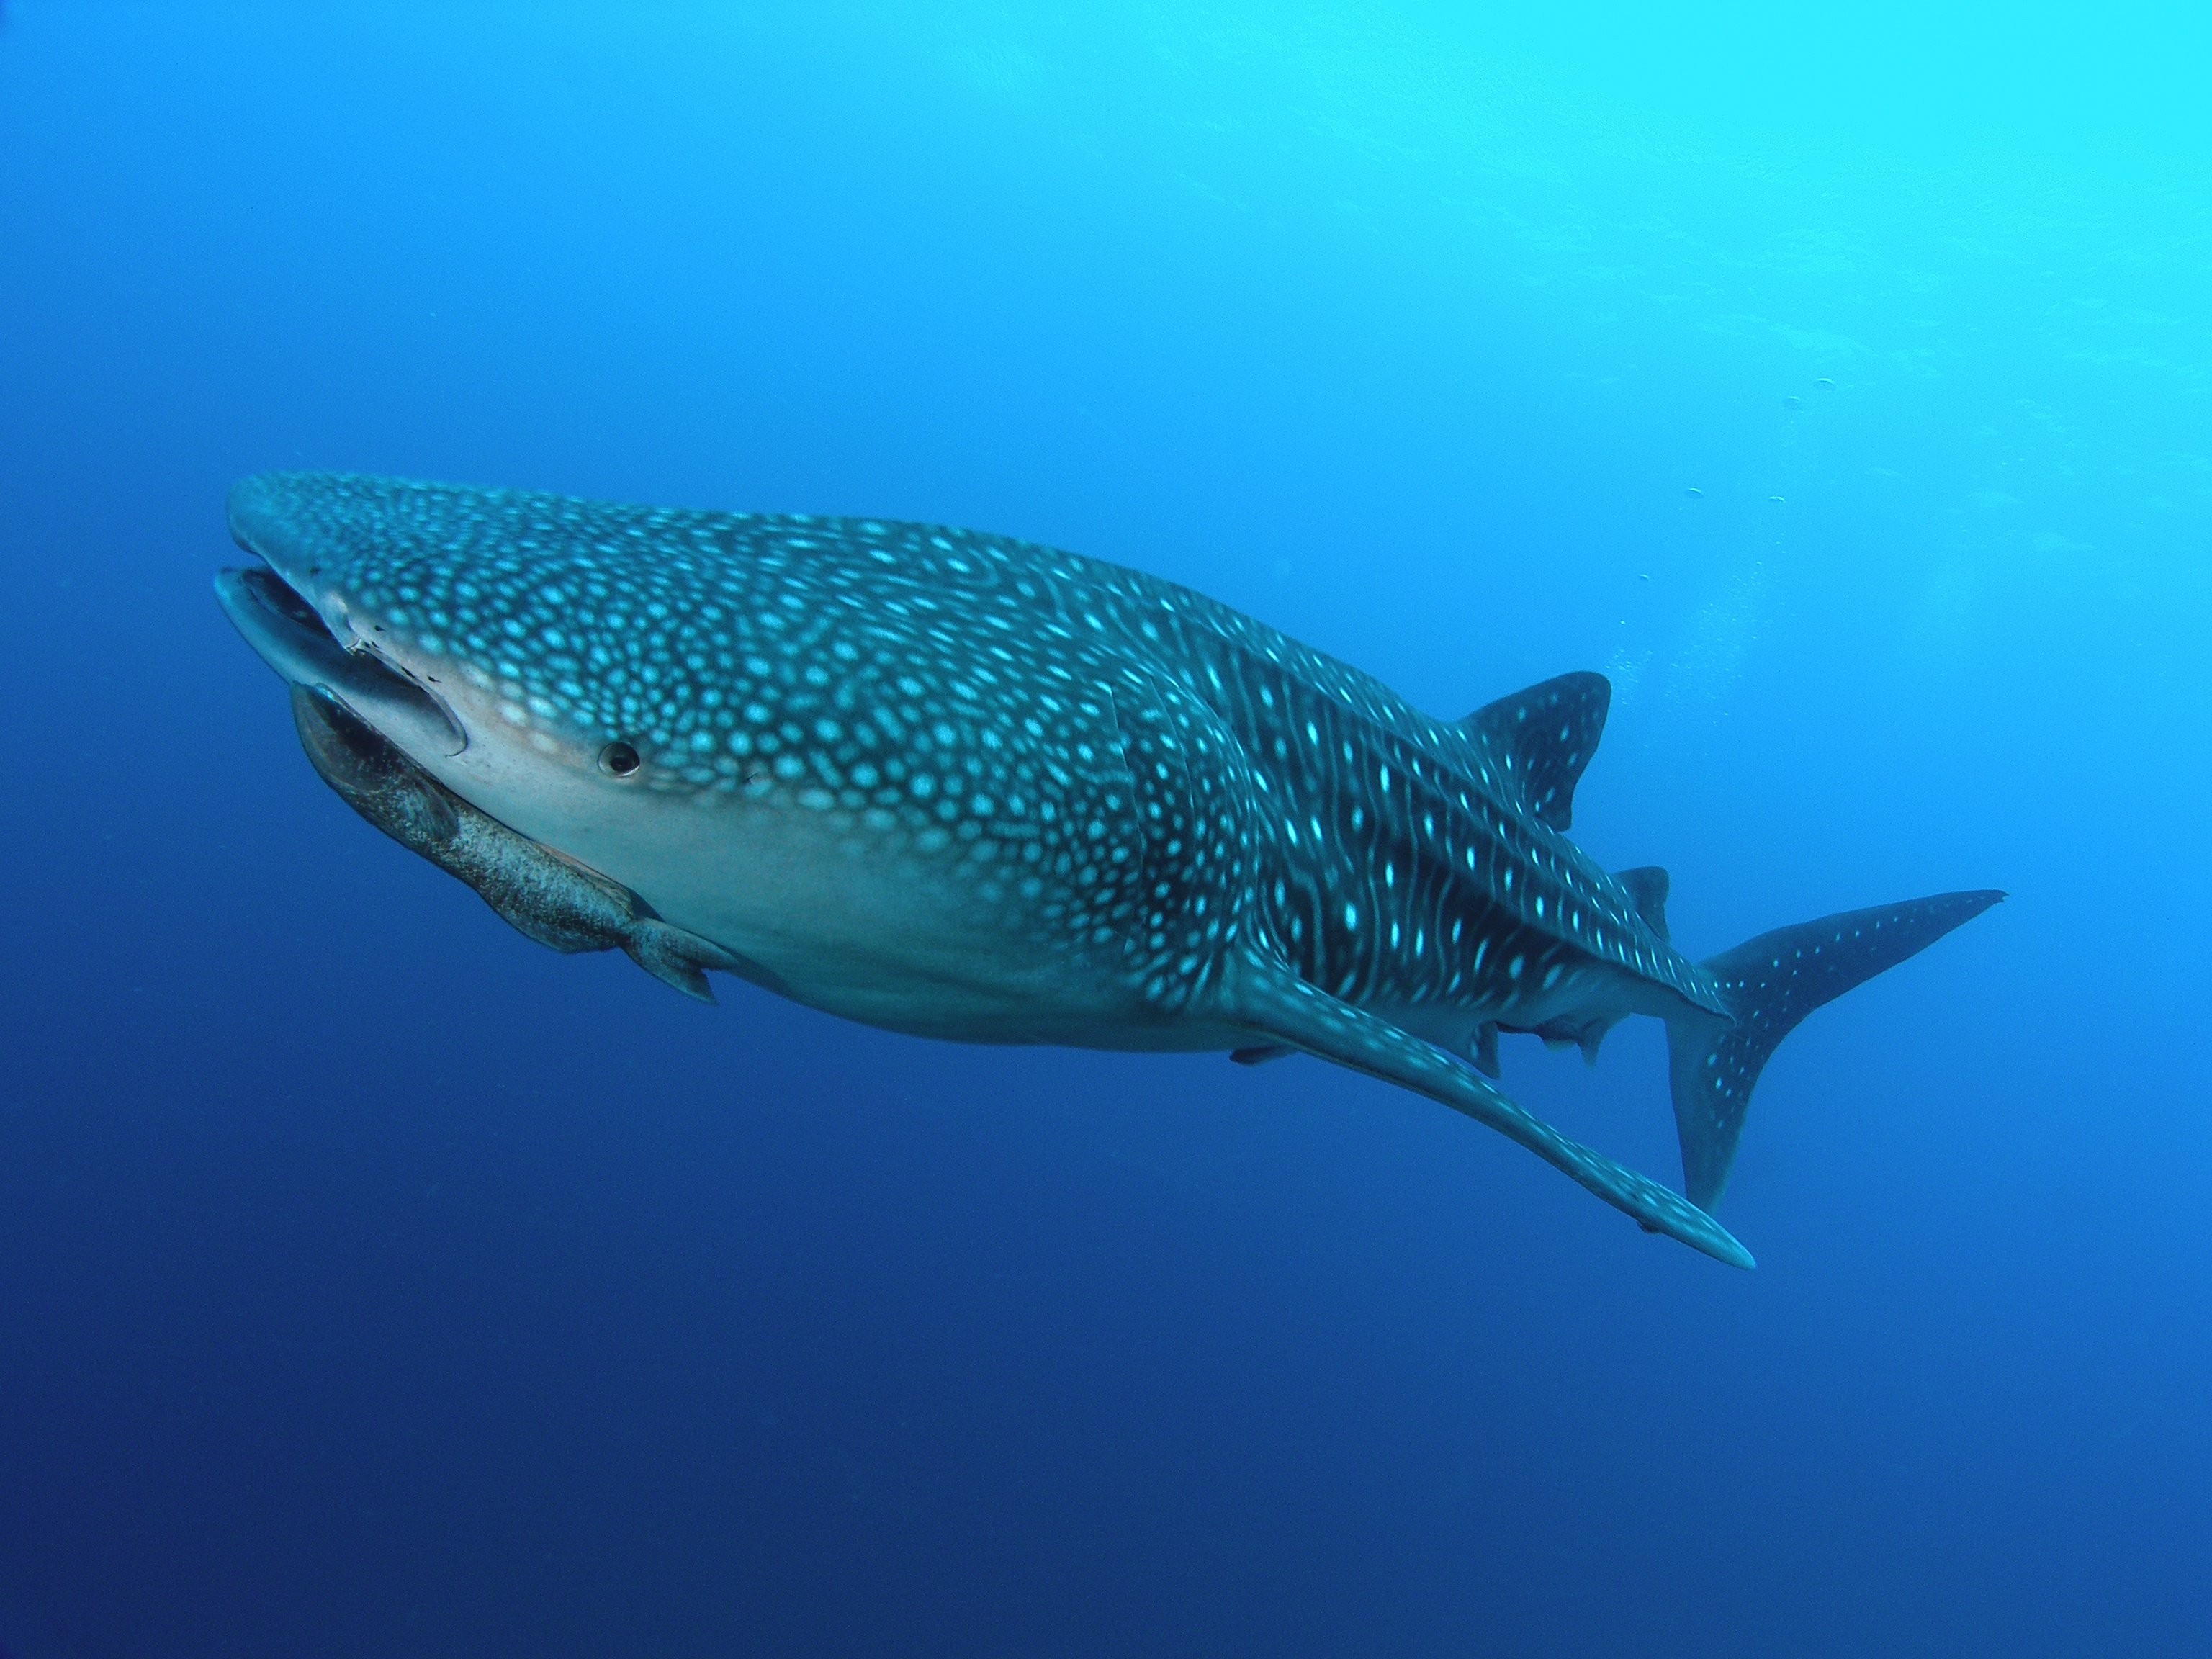 Largest Fish The Whale Shark Rhincodon Typus - HD Wallpaper 